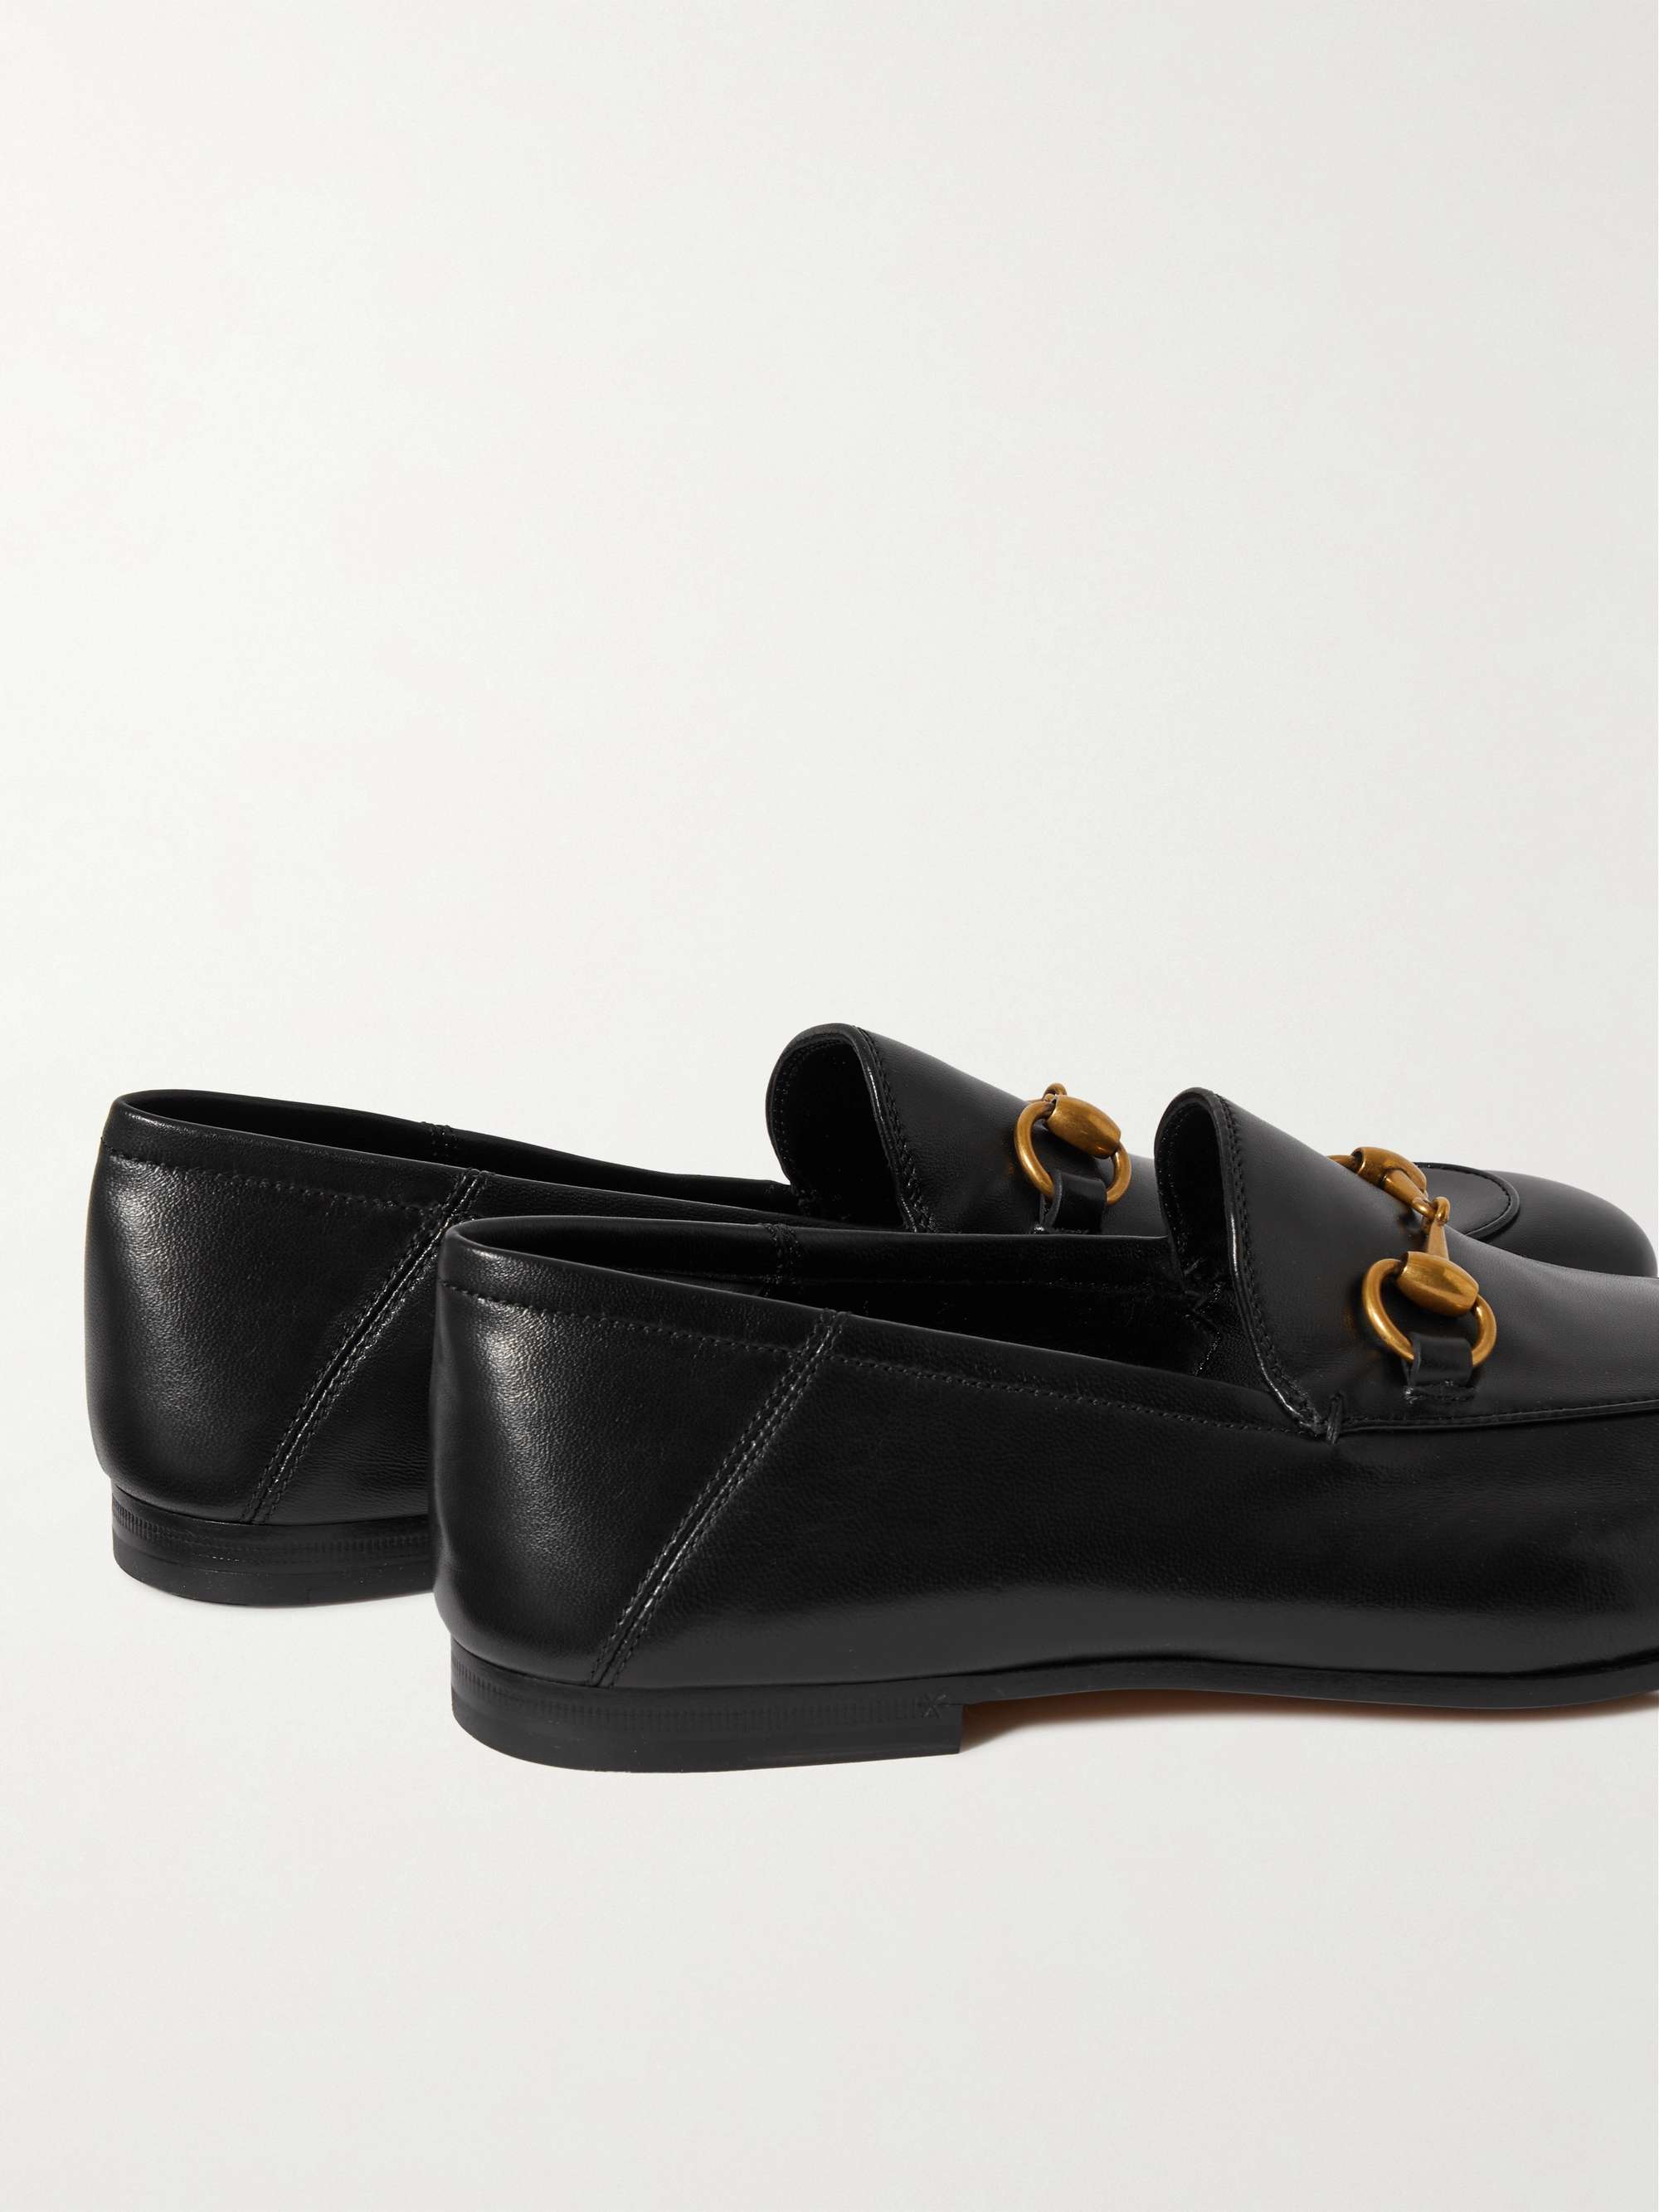 GUCCI Brixton Horsebit Collapsible-Heel Leather Loafers | MR PORTER